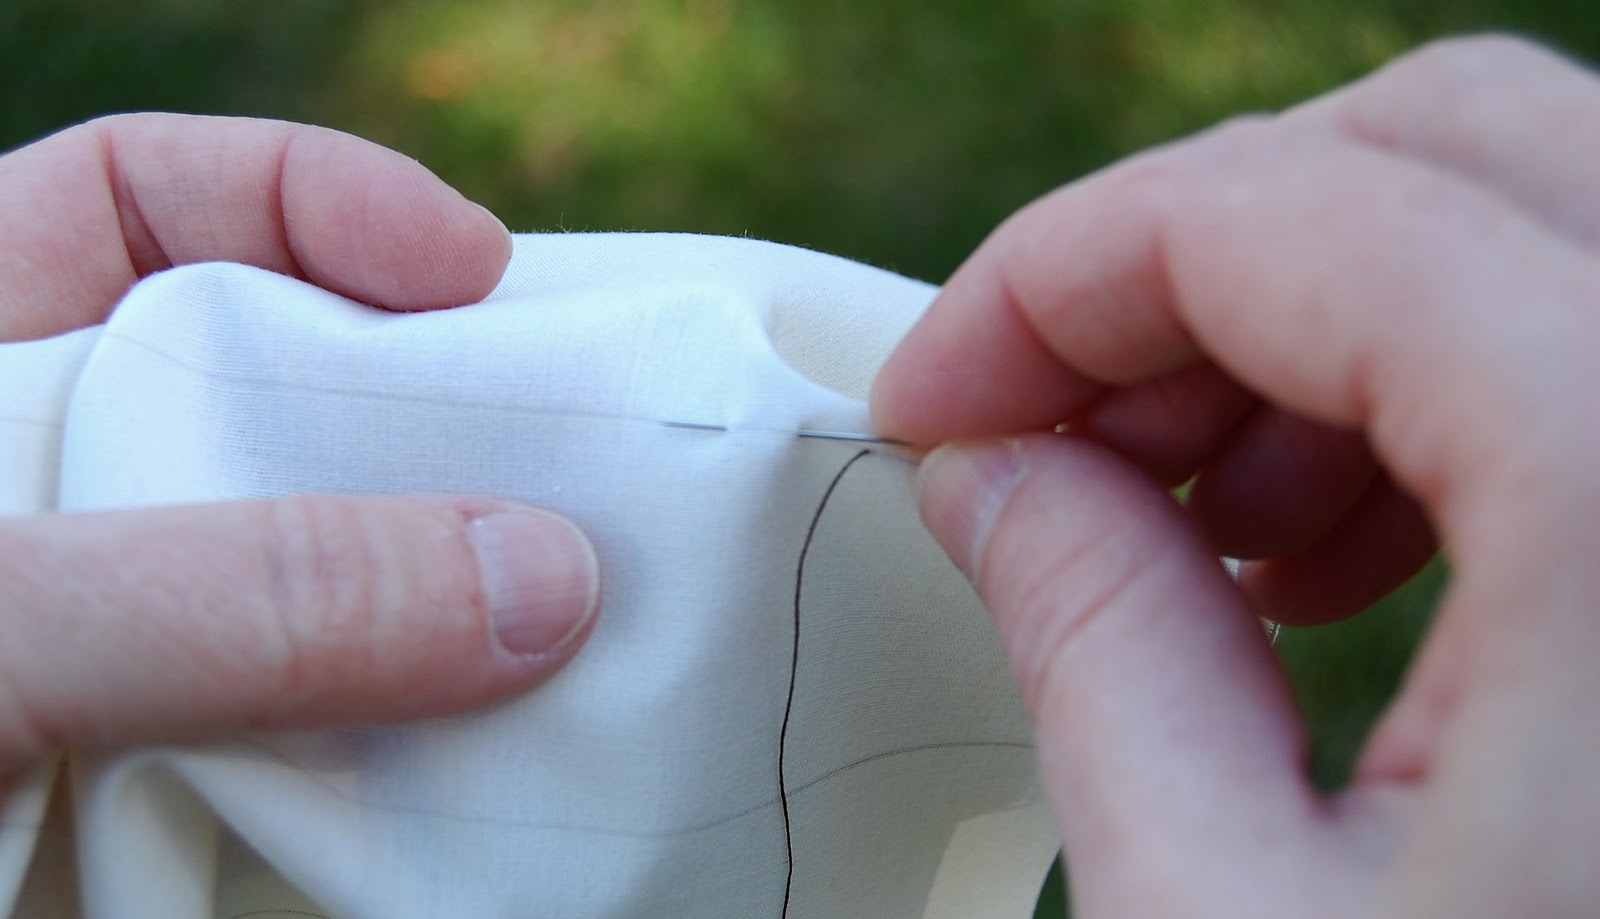 Hand sewing for beginners: techniques, stitches and projects